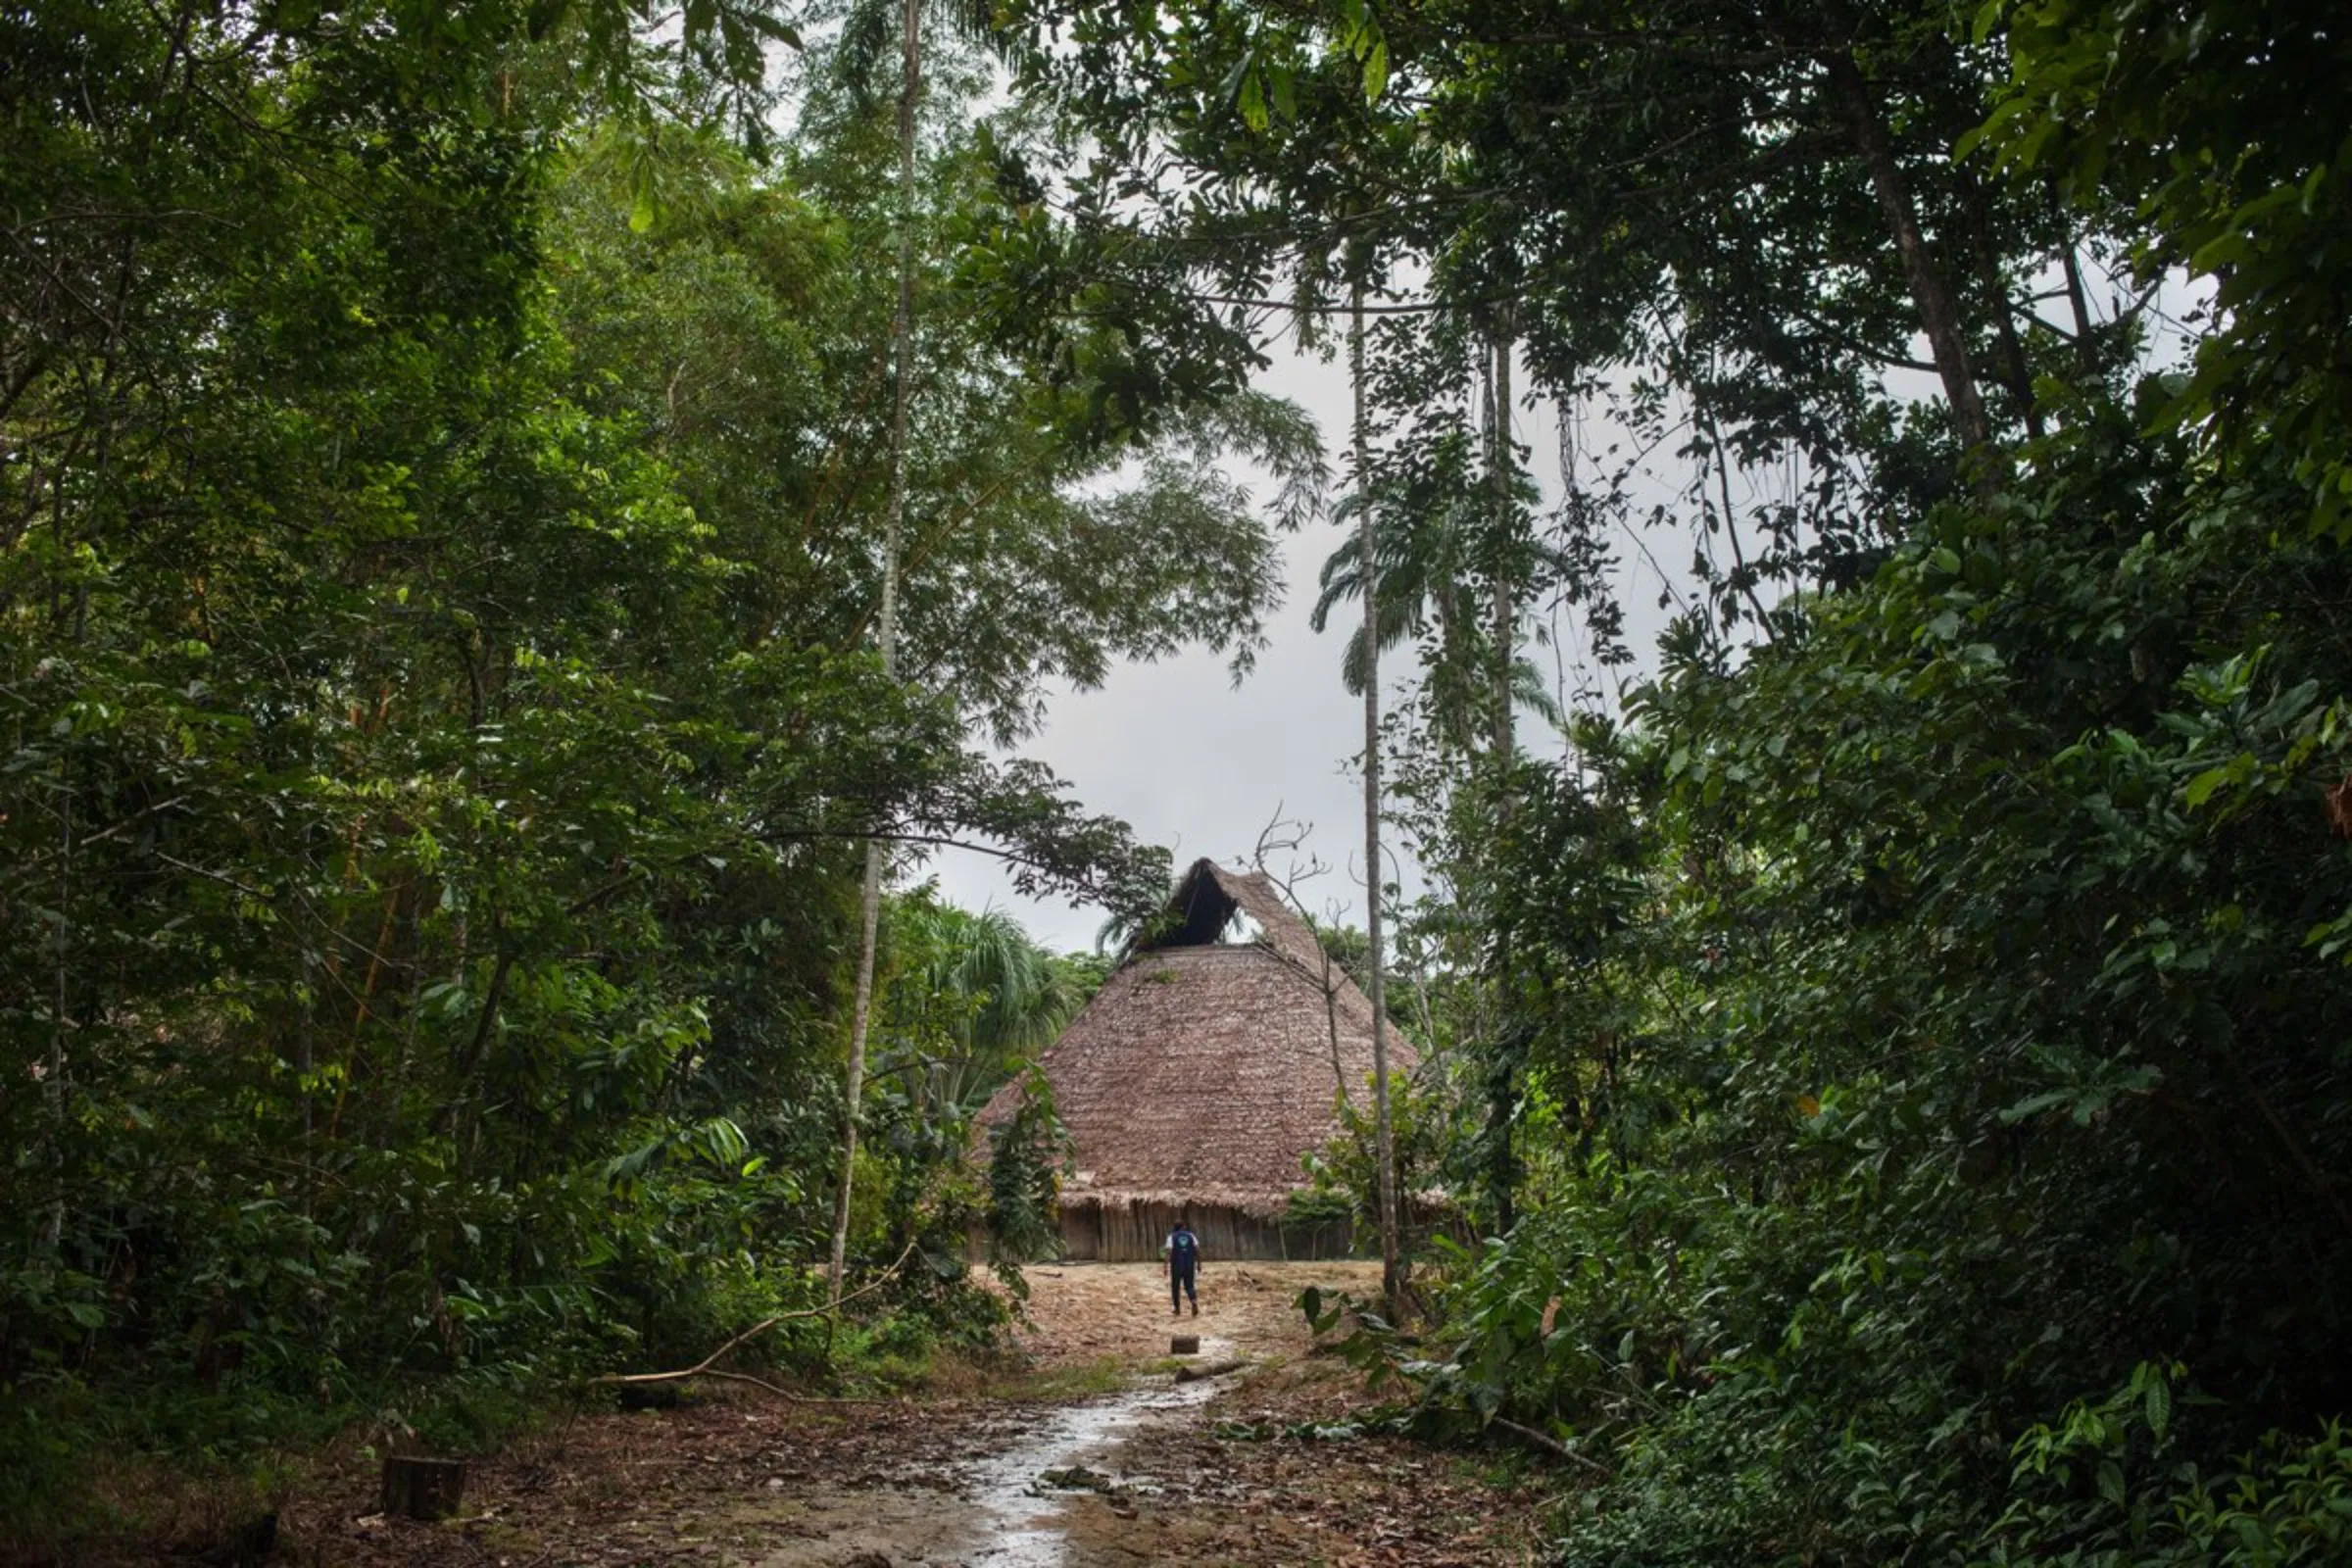 A view of a maloka, a traditional thatched communal dwelling used for rituals, meetings, cooking and as a home for some community members, along the Miriti-Parana River in Colombia’s southeast Amazonas province, December 16, 2021